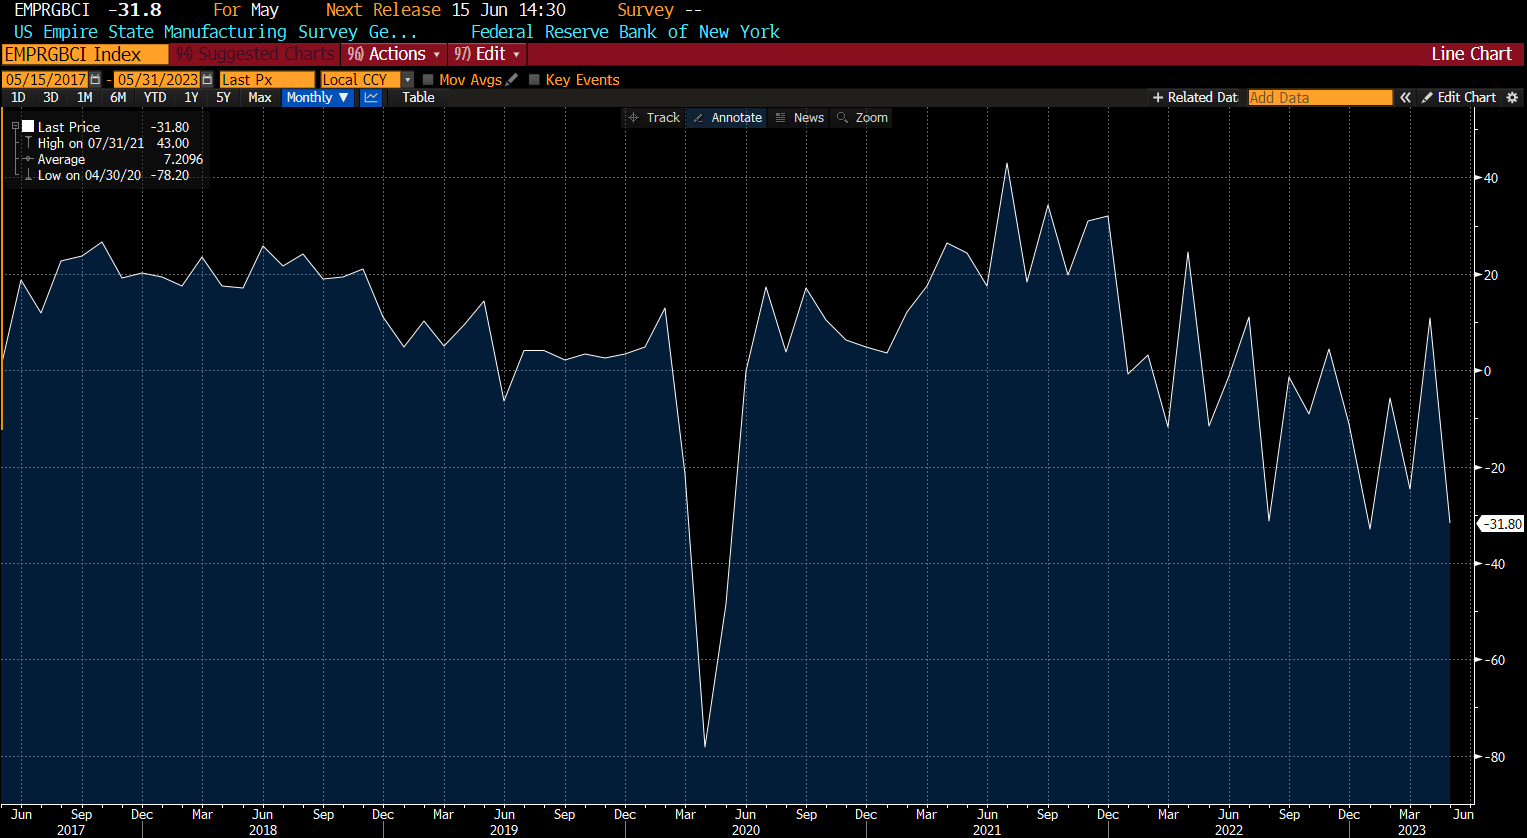 US MAY EMPIRE STATE FACTORY INDEX FALLS TO -31.8 (lowest since Jan.2023), EST. -3.9